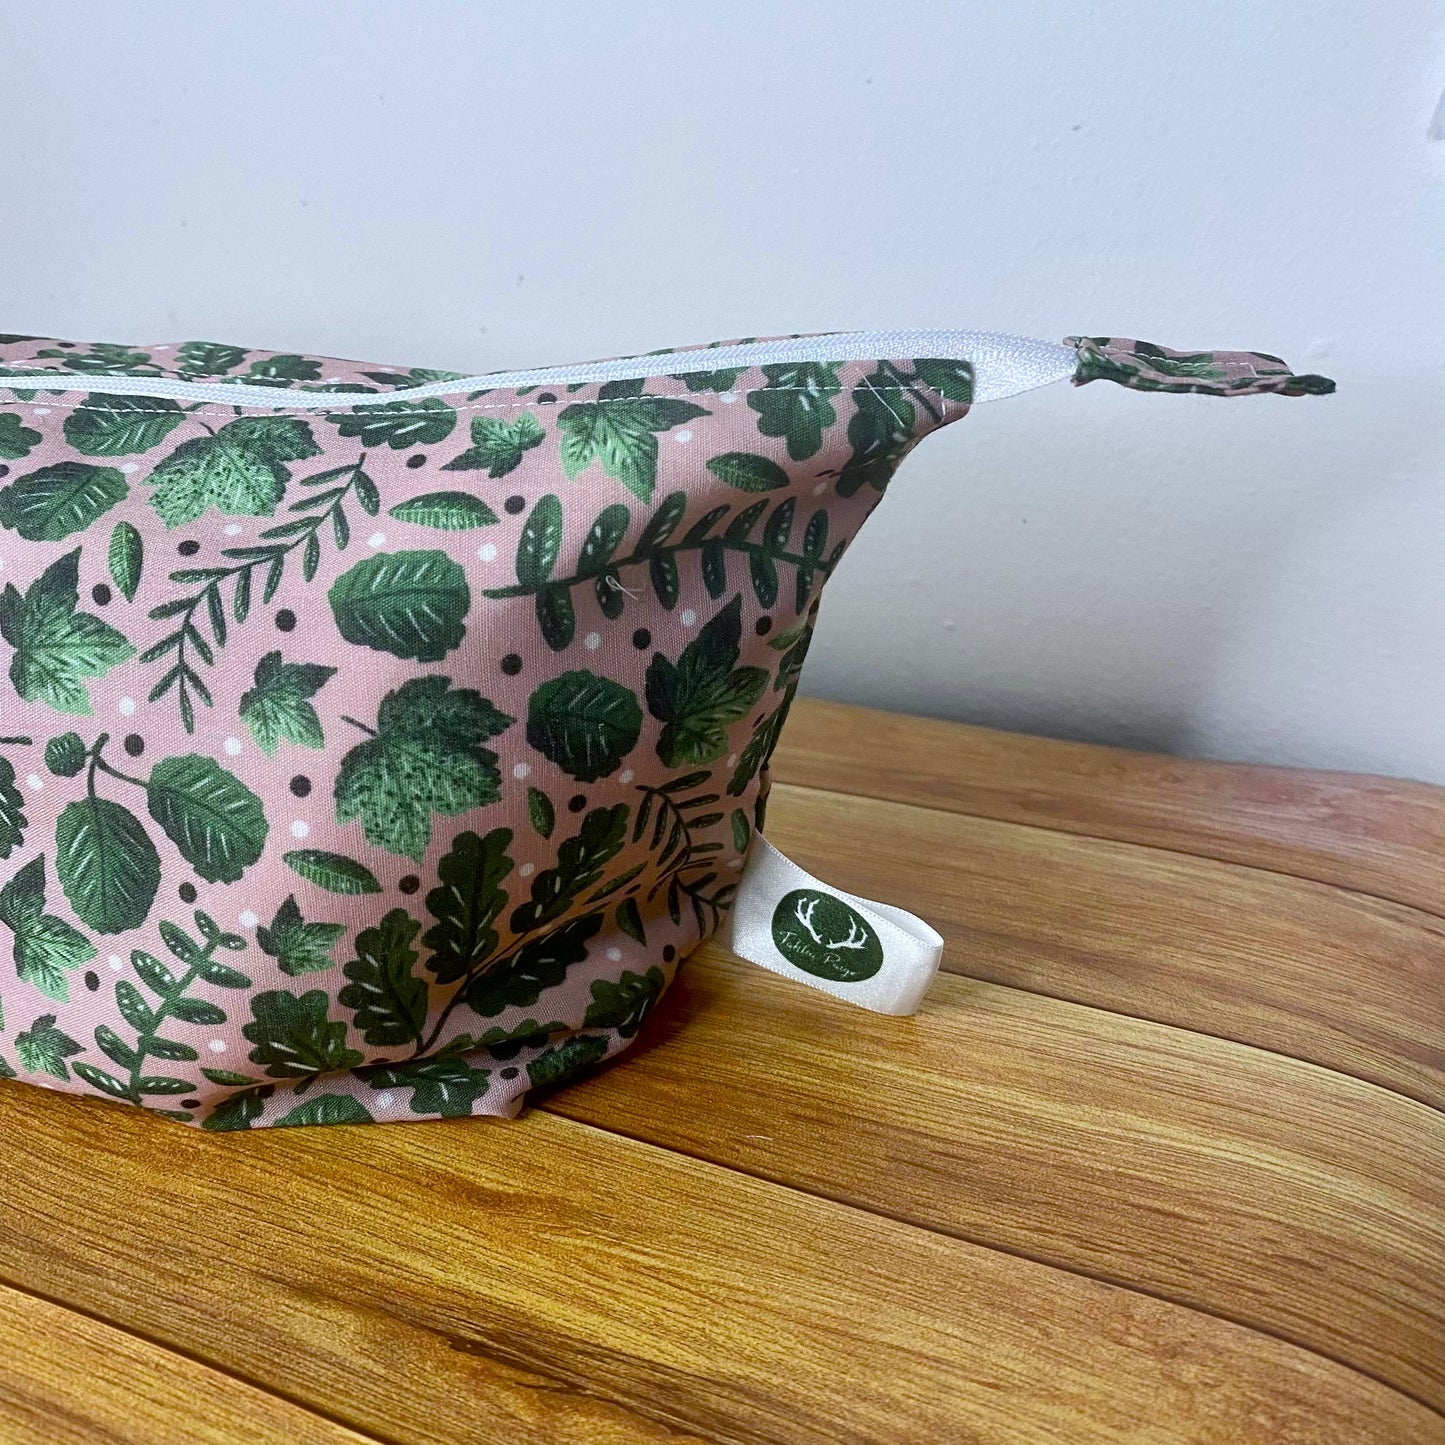 Closeup of half of the makeup bag showing the green foliage on pink pattern on a wooden background behind it